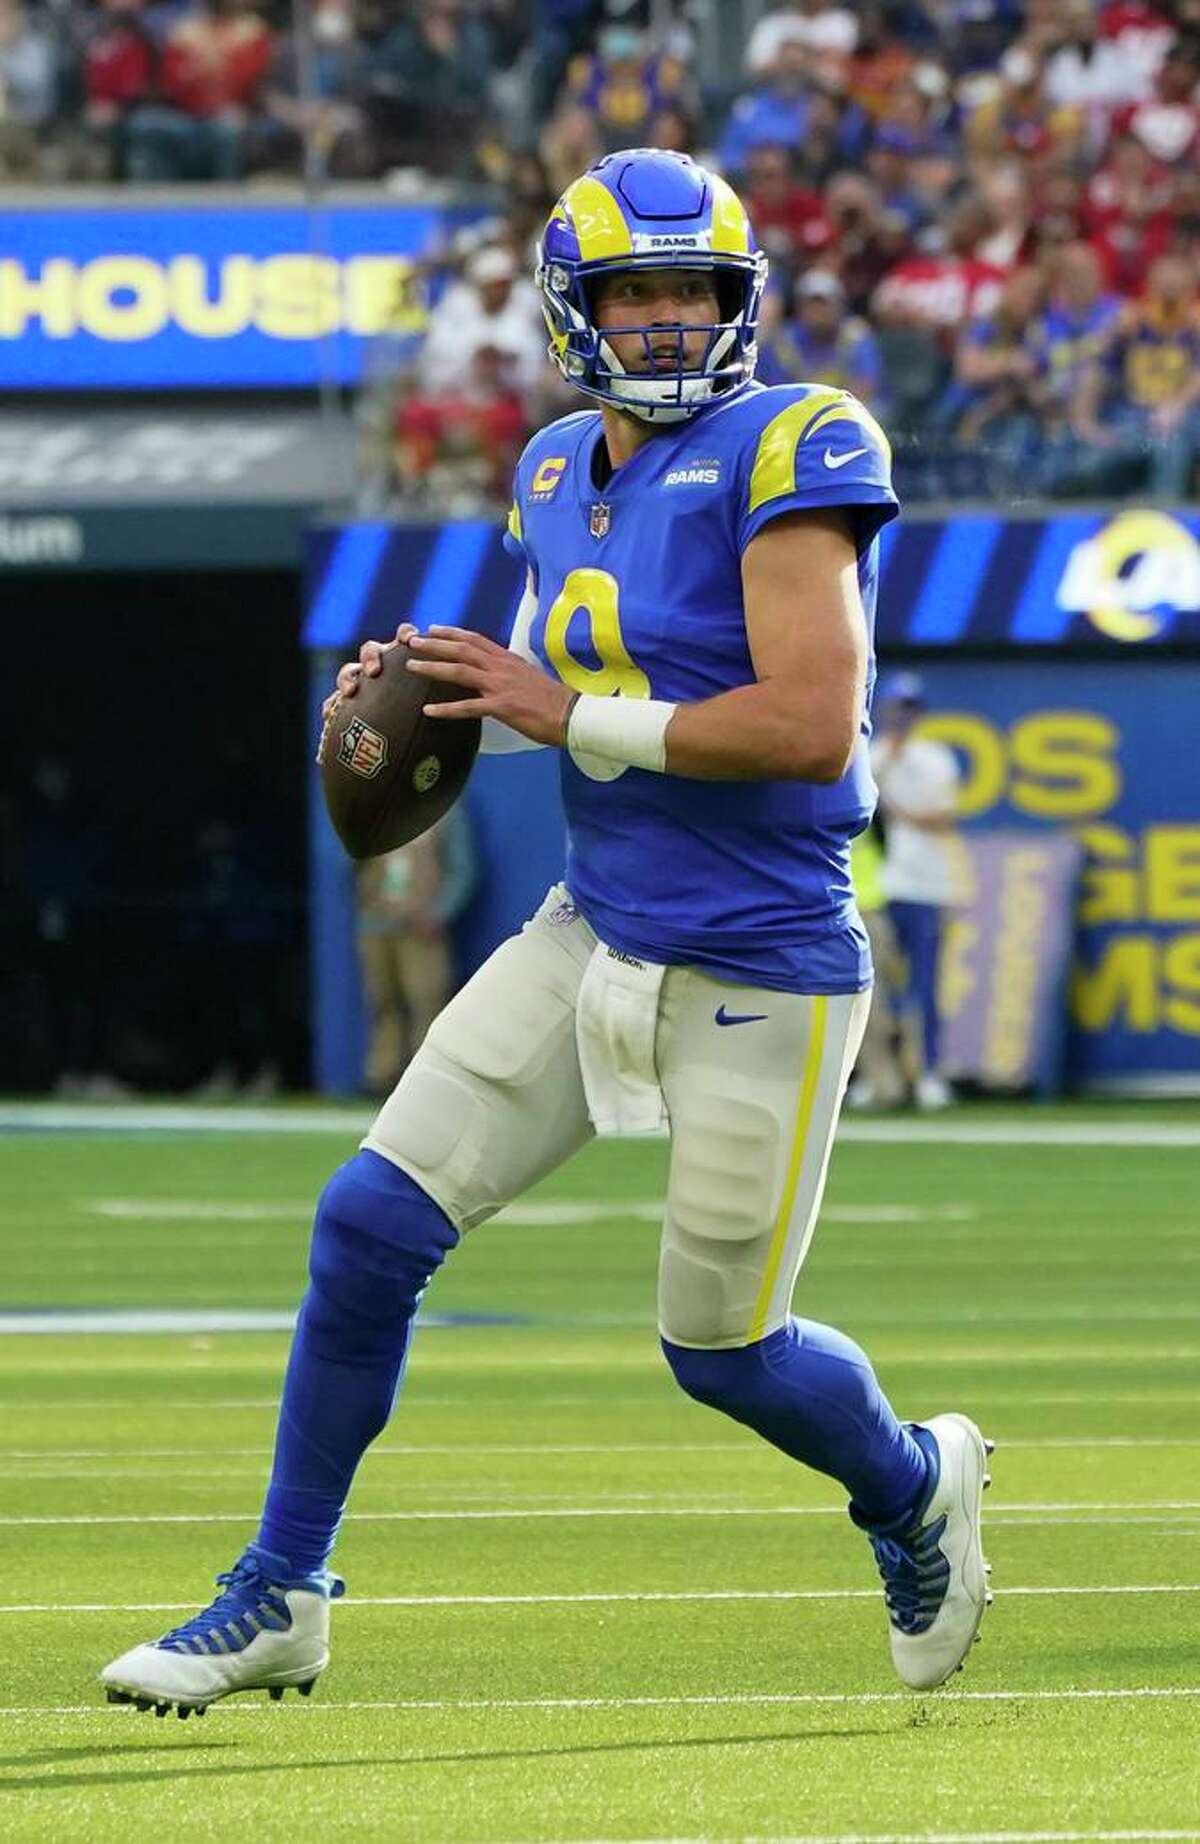 Los Angeles Rams quarterback Matthew Stafford (9) looks for a receiver during an NFL football game against the San Francisco 49ers Sunday, Jan. 9, 2022, in Inglewood, Calif. (AP Photo/Marcio Jose Sanchez)